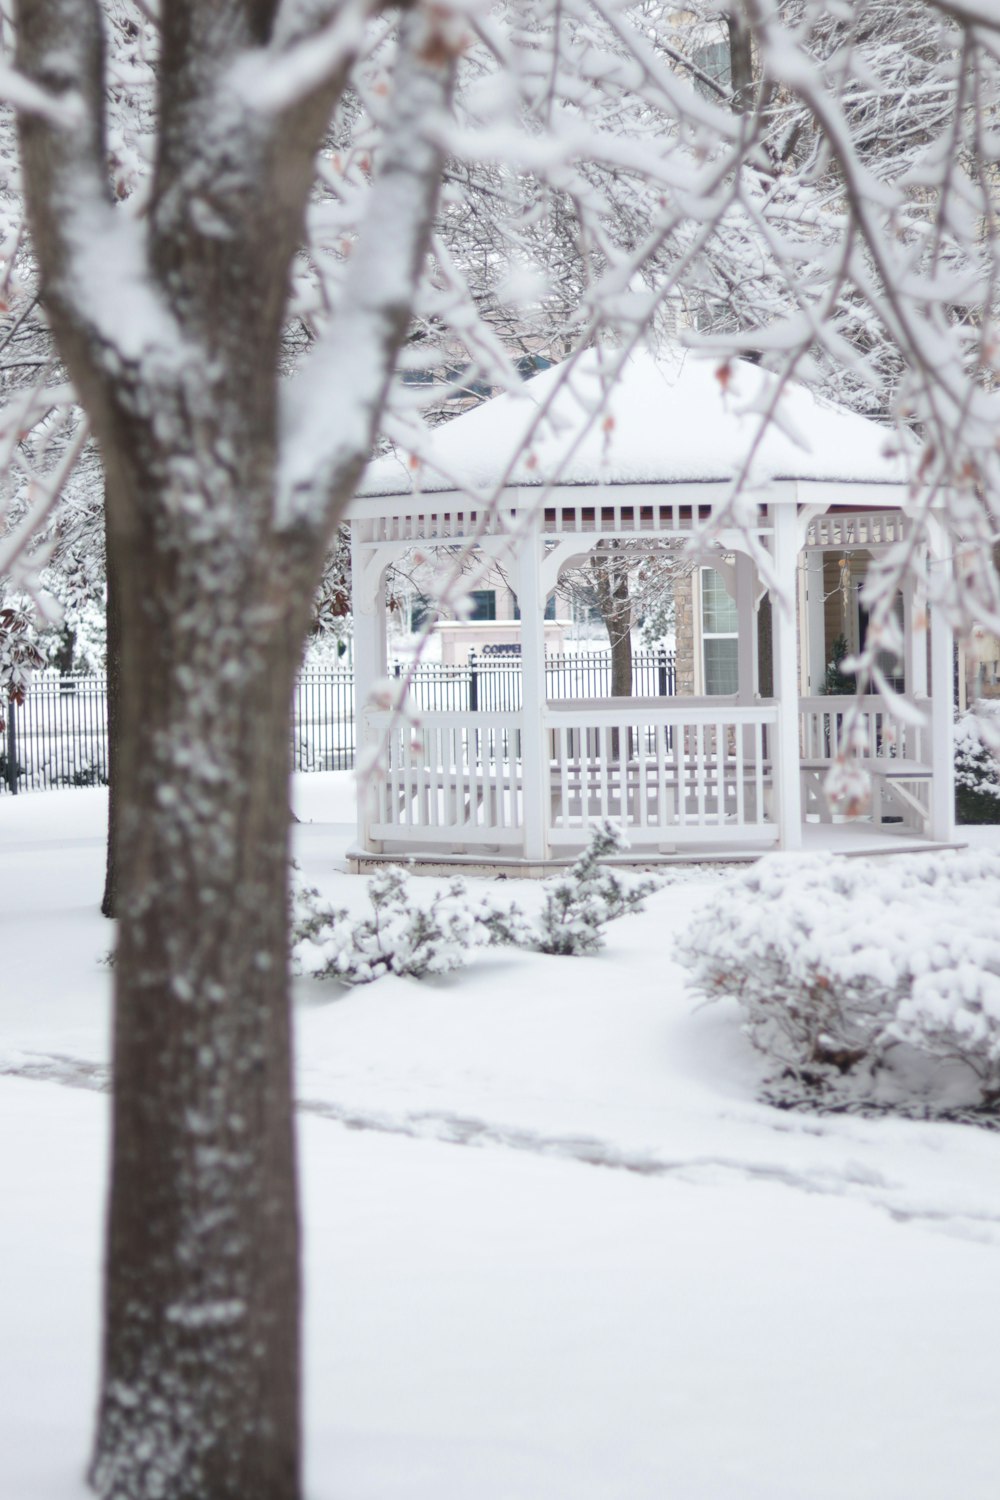 a gazebo in the middle of a snowy yard